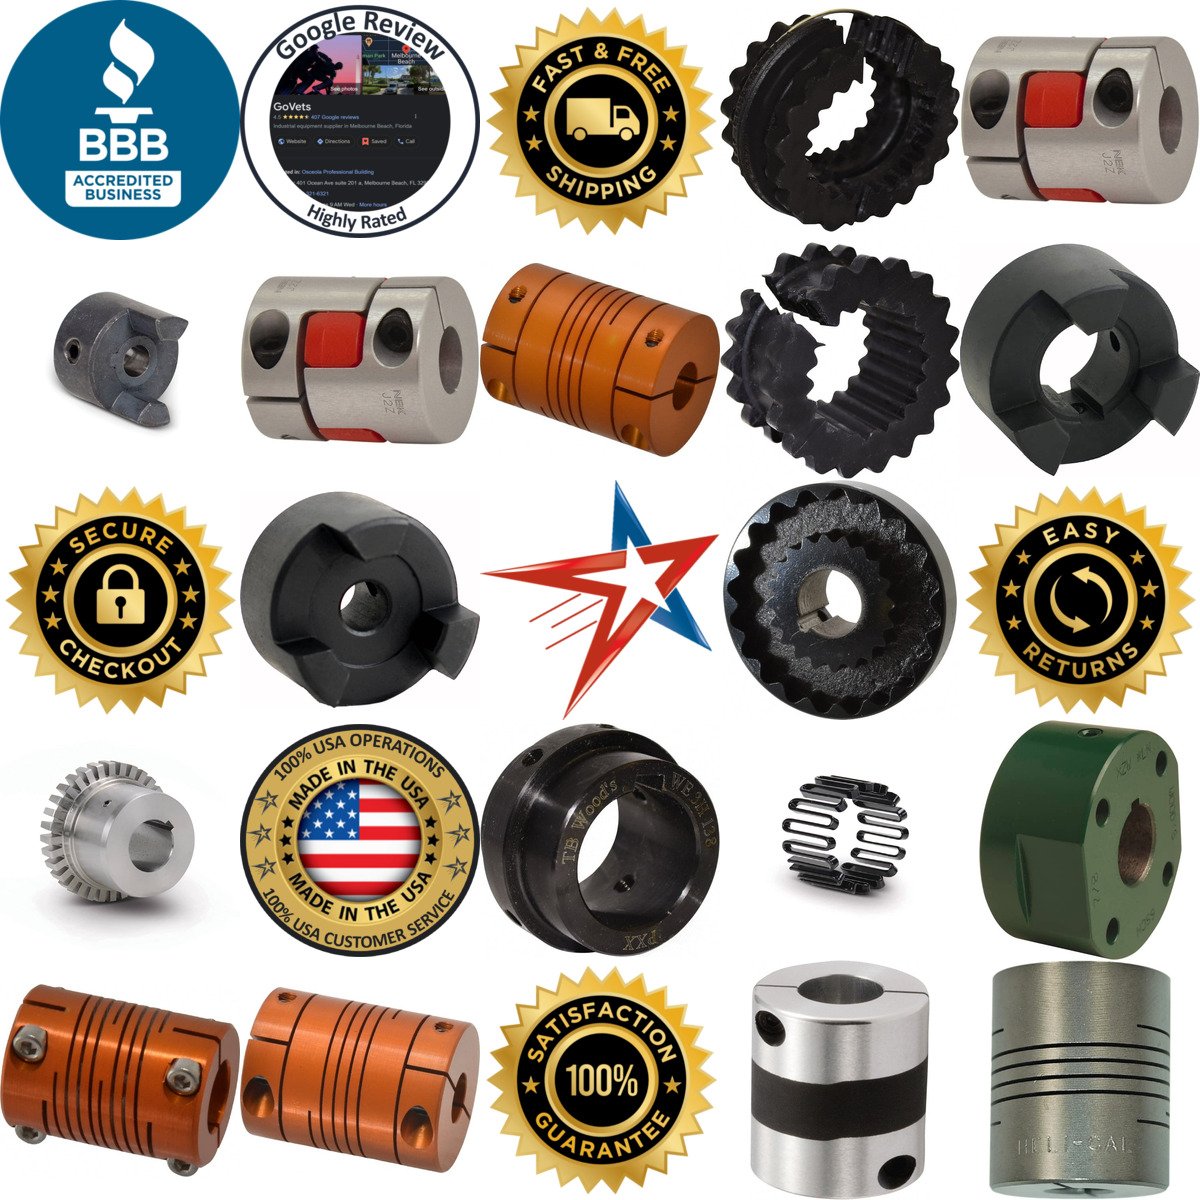 A selection of Flexible Coupling products on GoVets